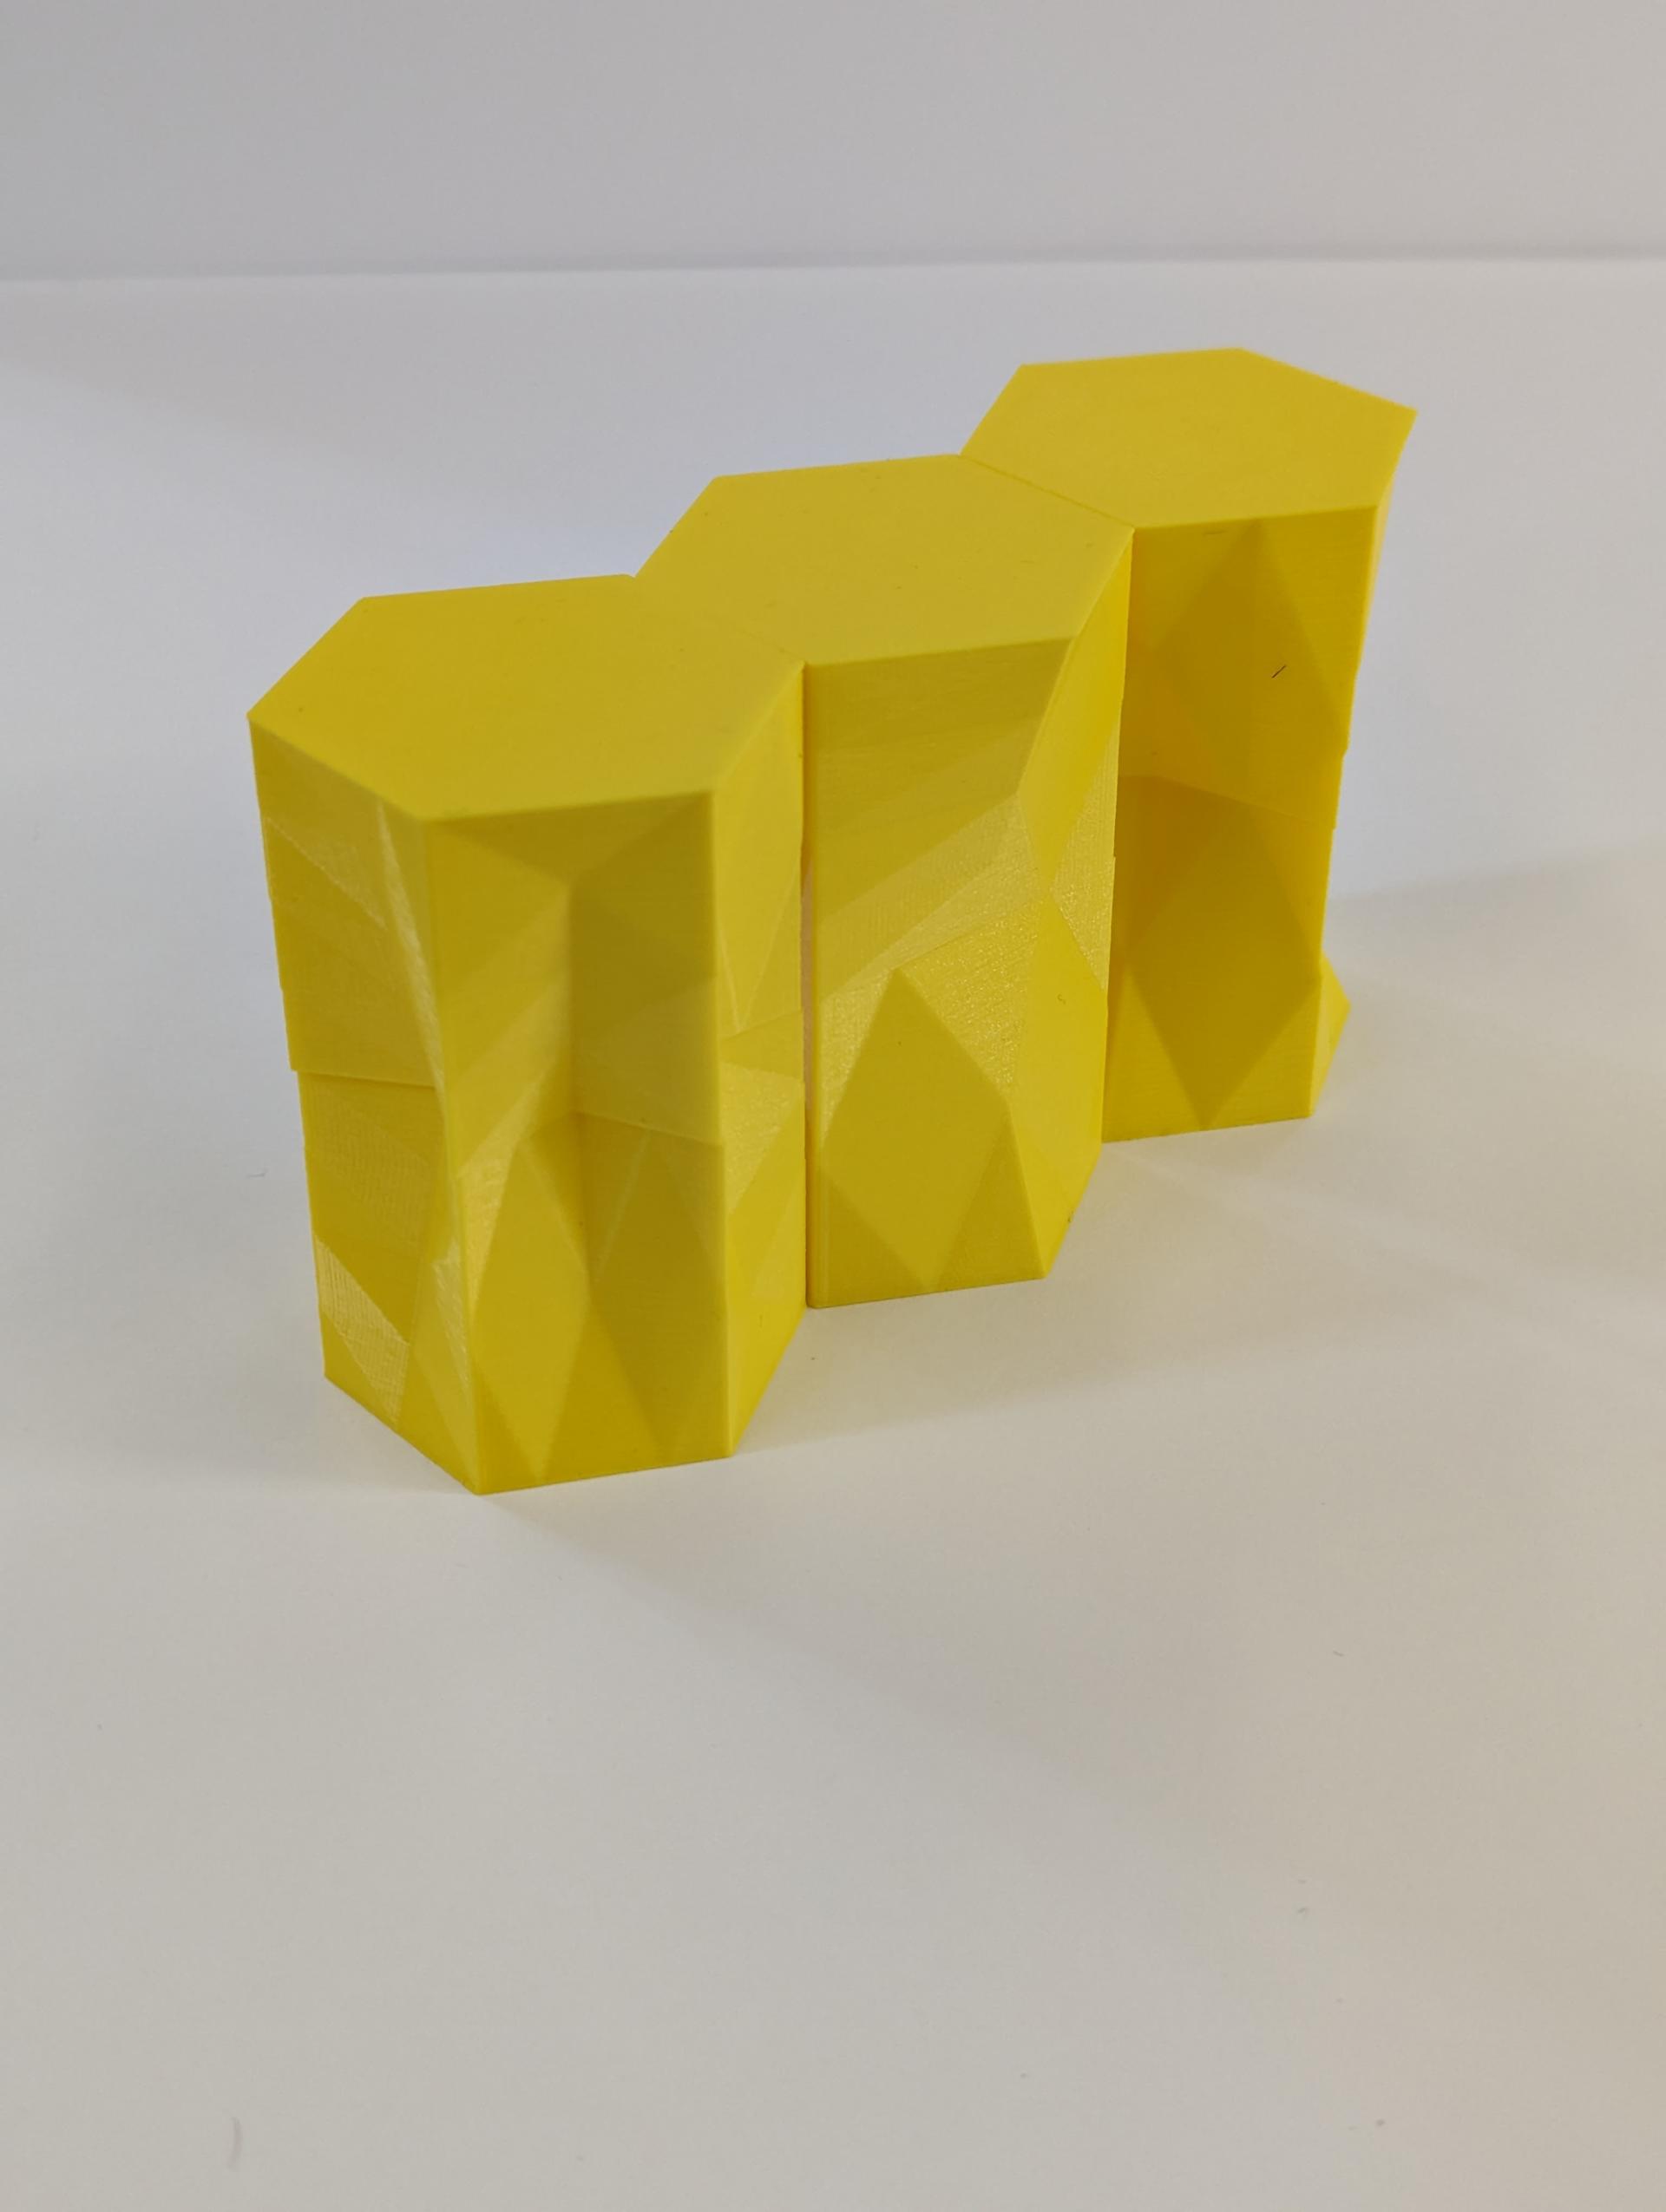 Small 3D printed extrusions translate from hexagons to other shapes and back to hexagons.